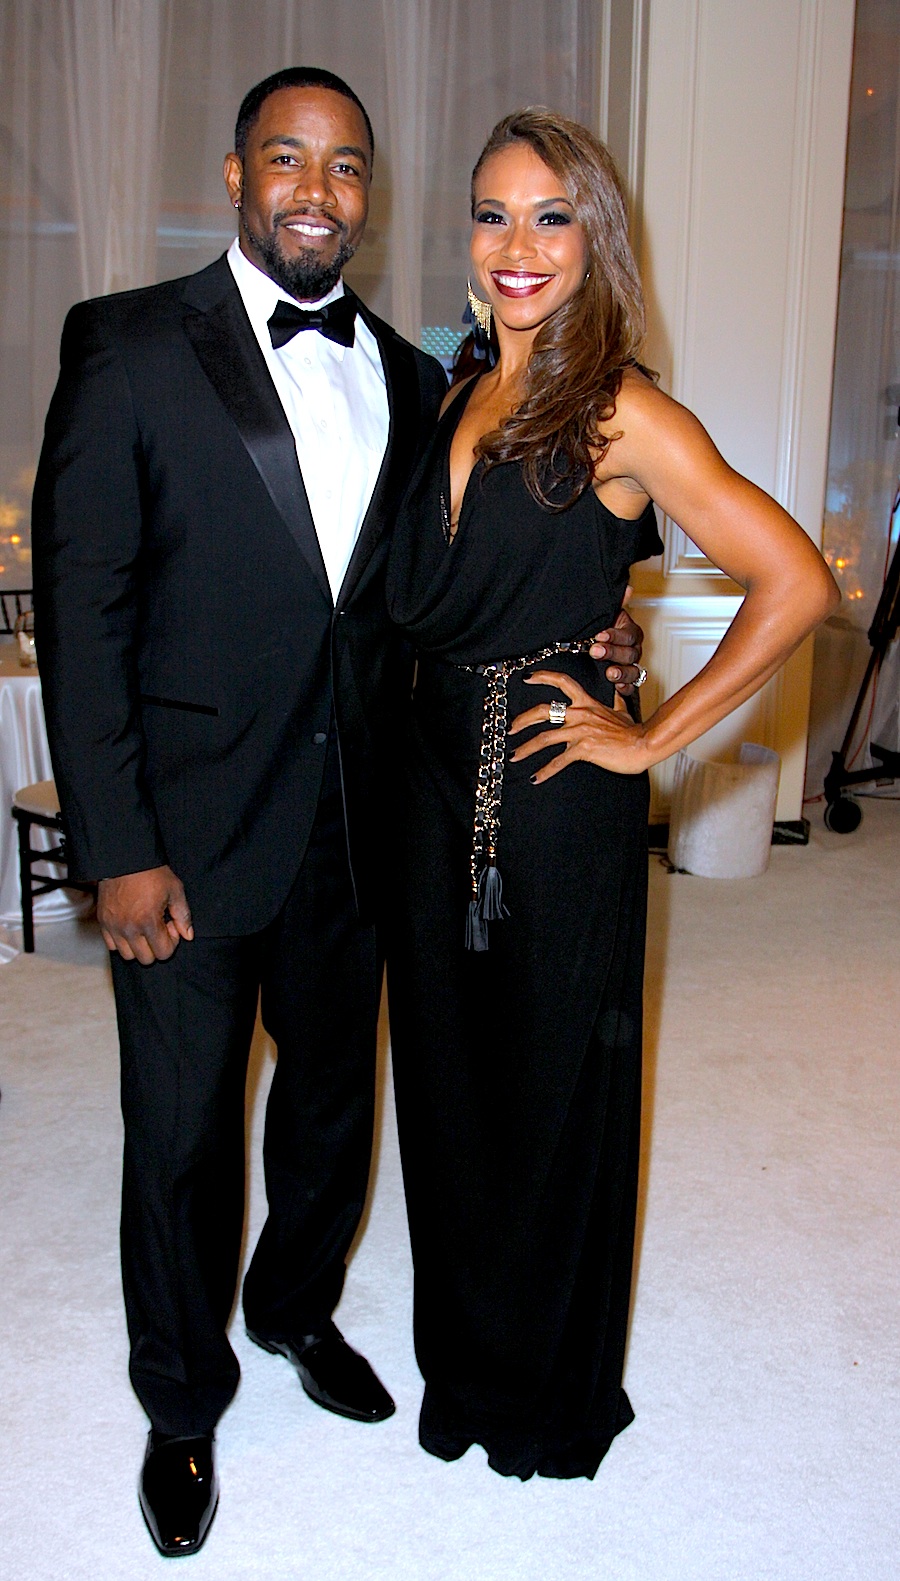 Actor Michael Jai White and Actress Gillian Iliana Waters attend Master P's Let The Kids Grow Foundation Gala in Beverly Hills.